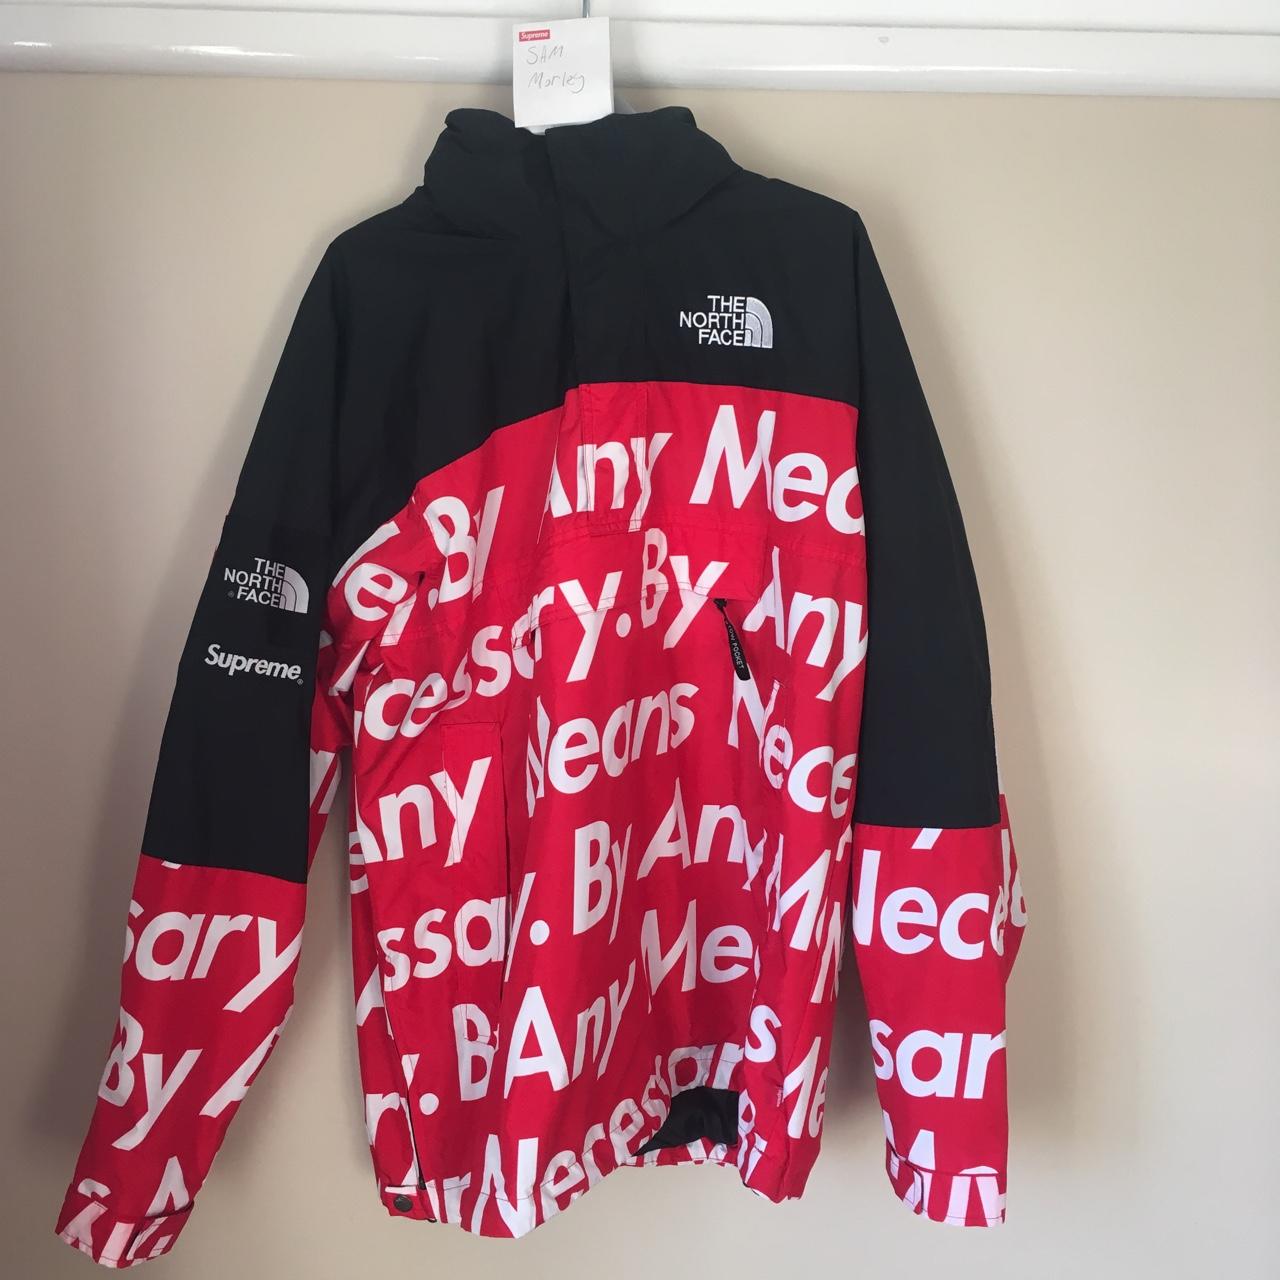 Supreme X The North Face By Any Means Necessary   Depop